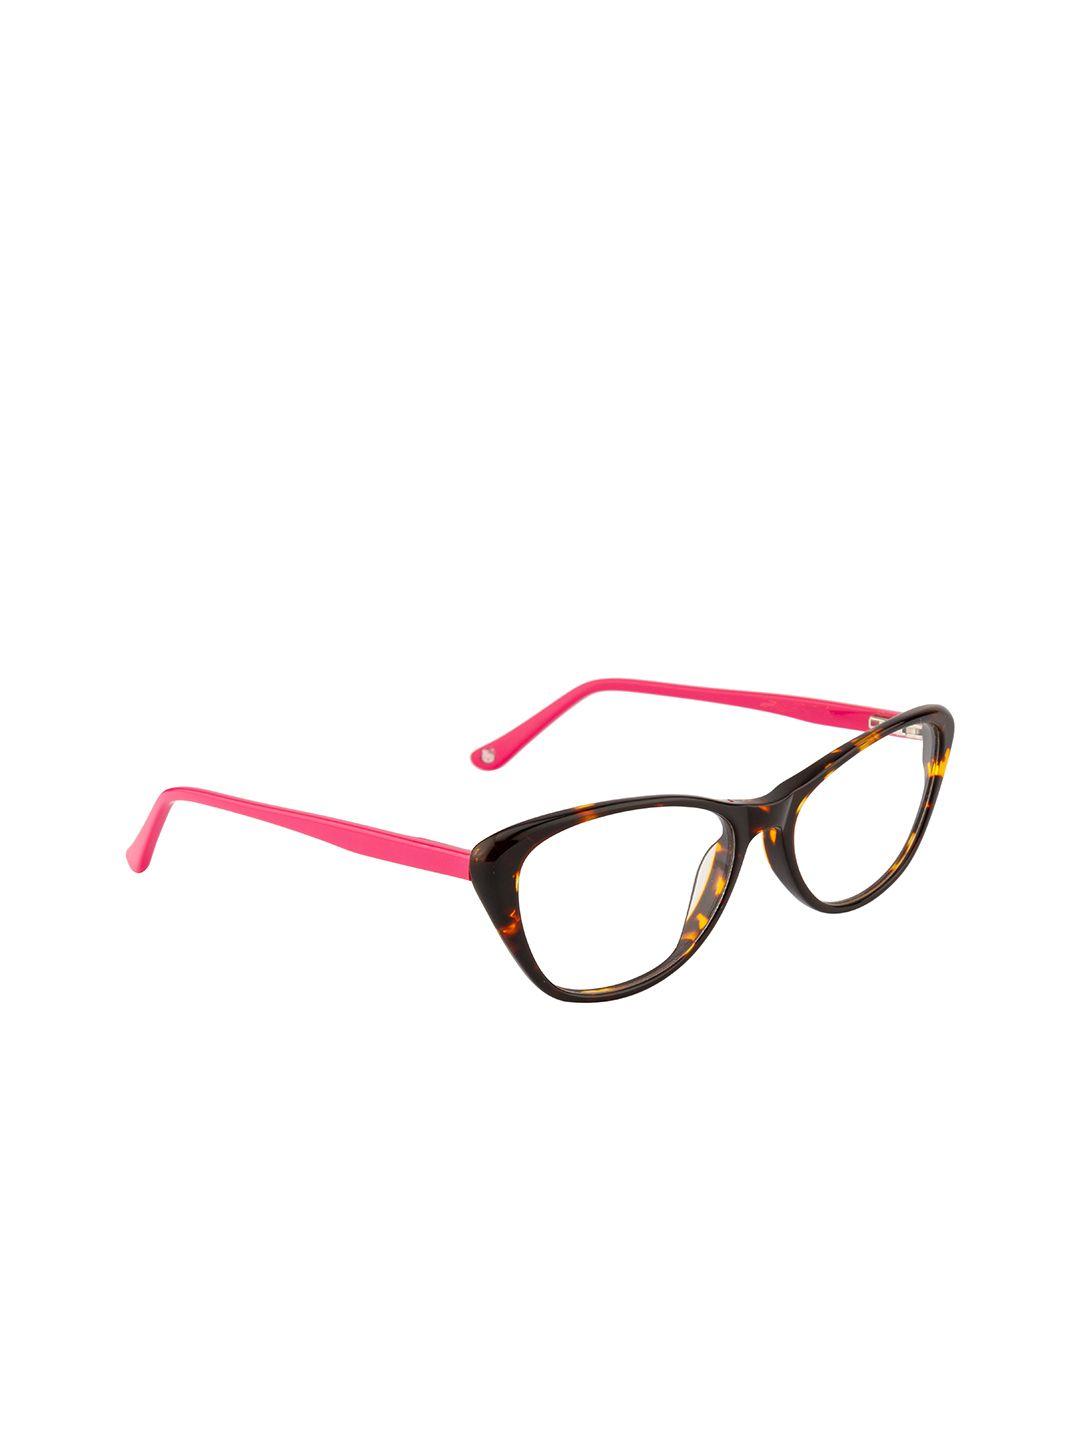 ted smith women pink & brown full rim cateye frames